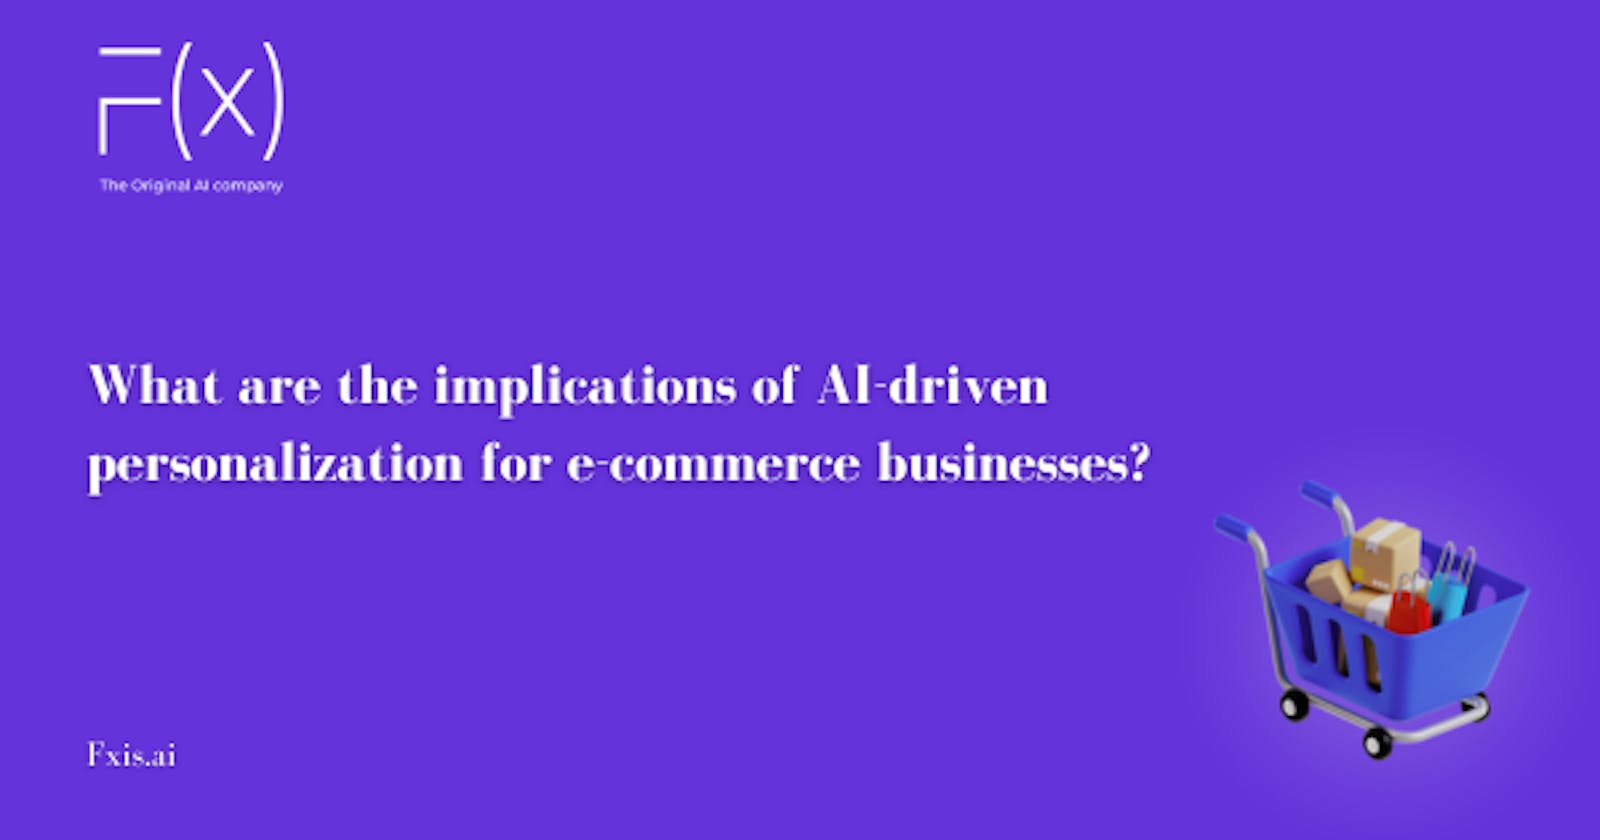 What are the implications of AI-driven personalization for e-commerce businesses?